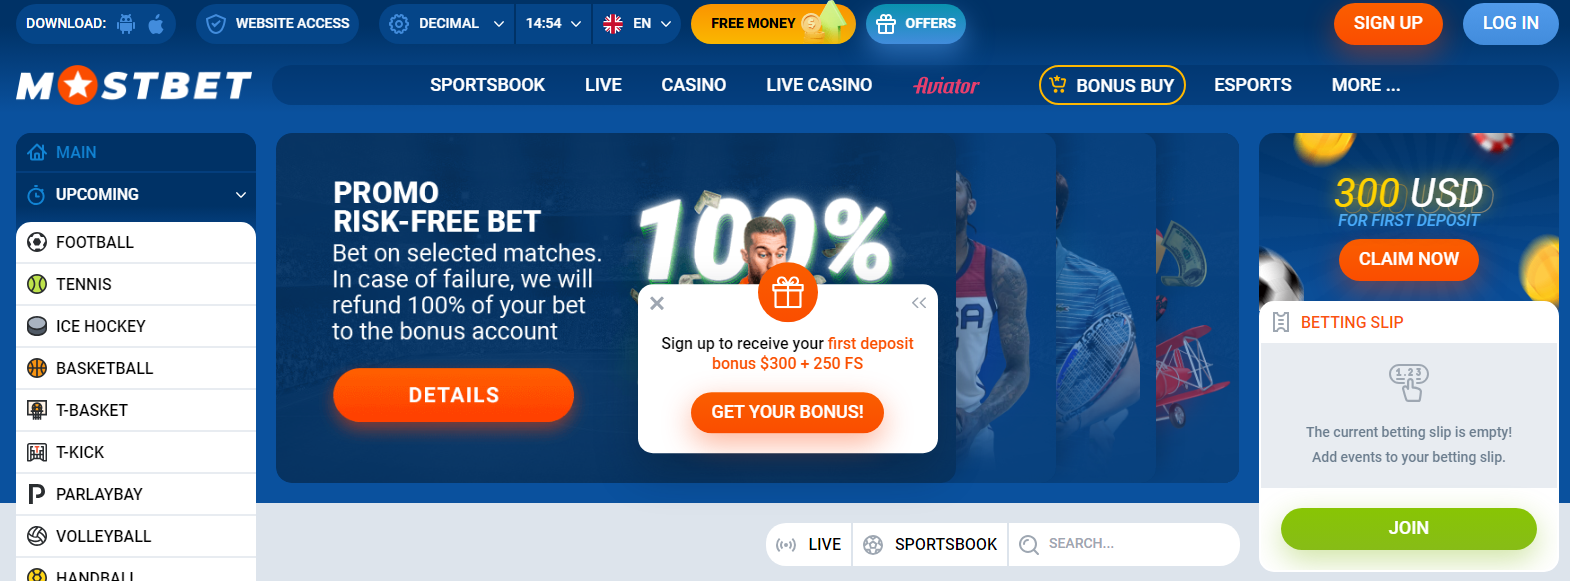 Mostbet Design and Usability